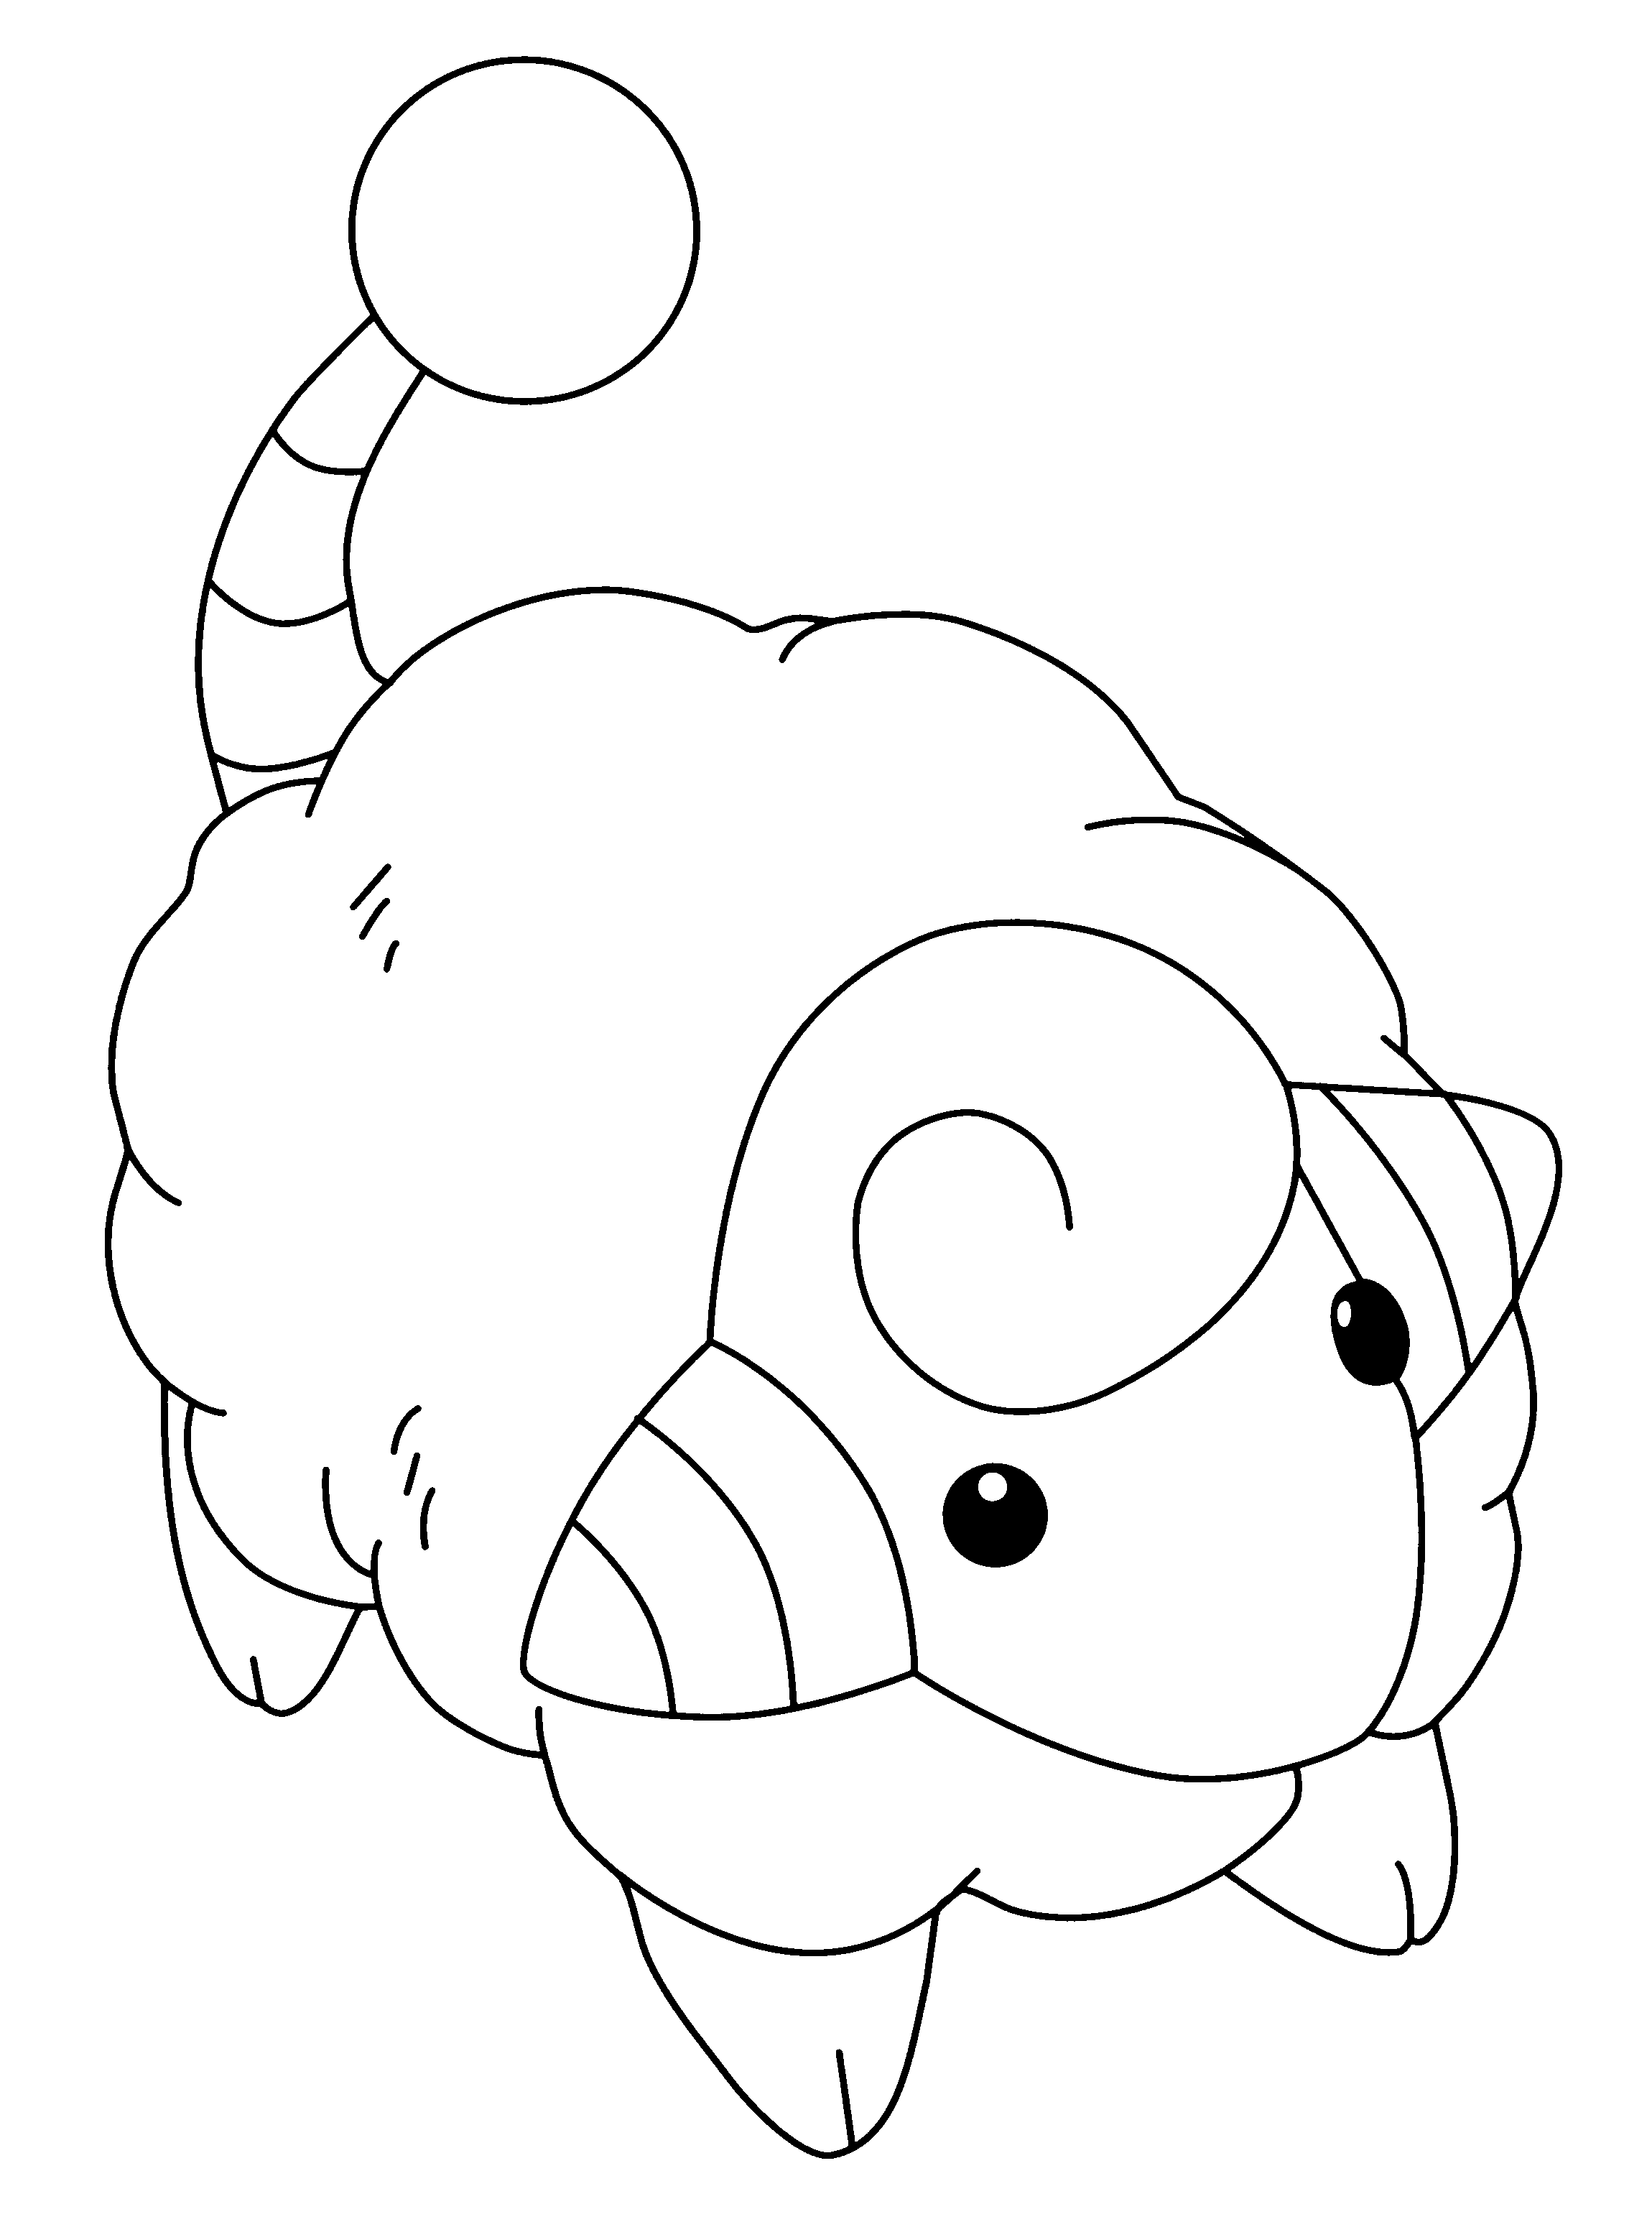 animated-coloring-pages-pokemon-image-0117